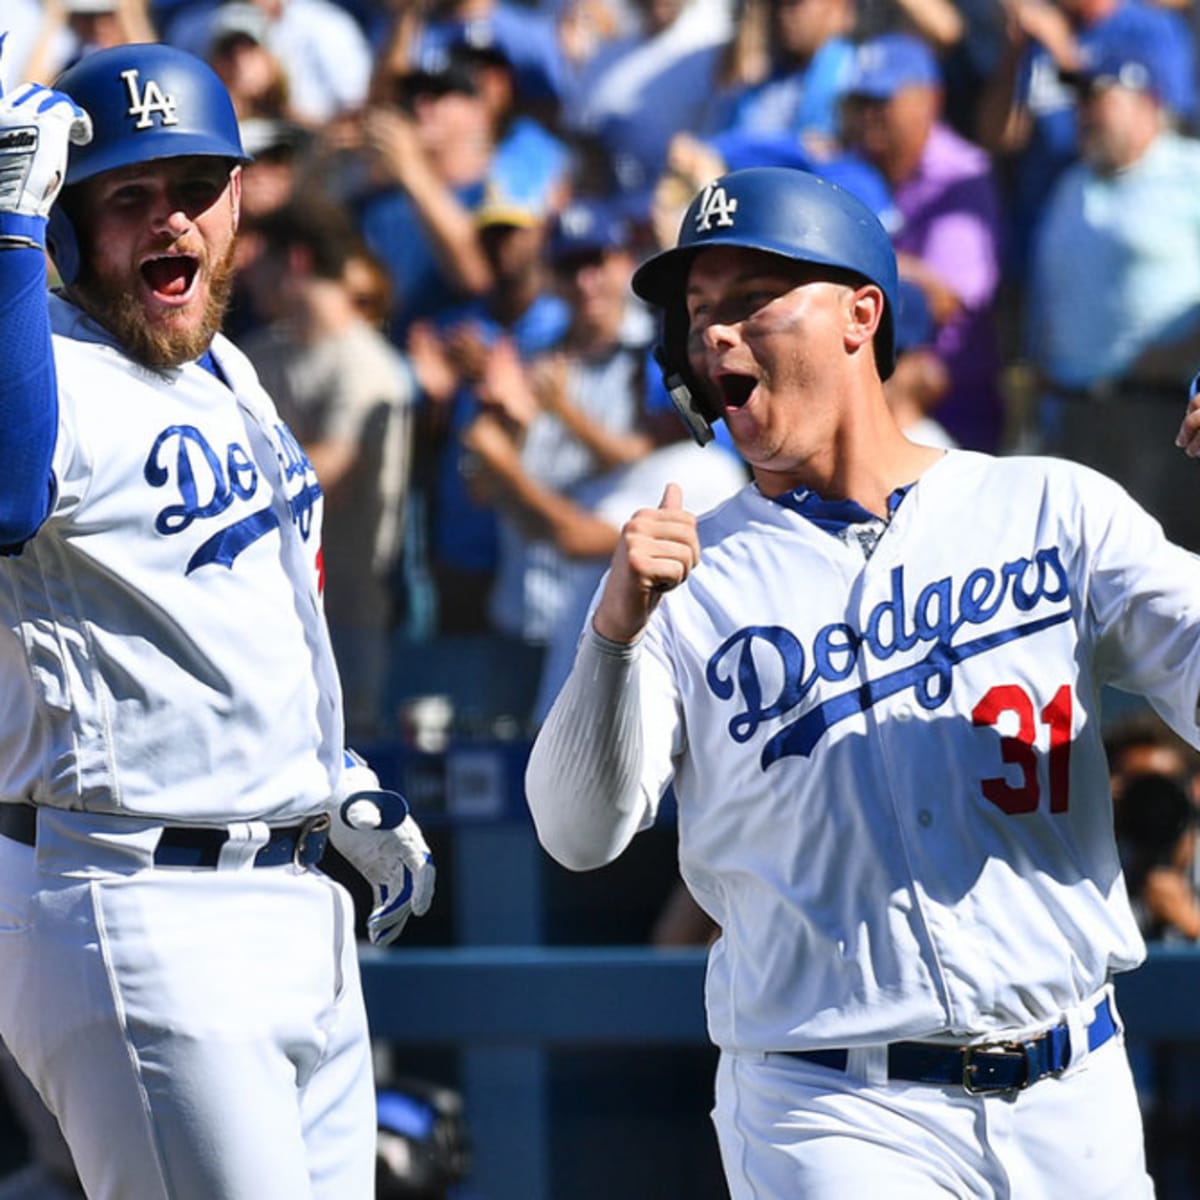 Royals ride big first inning to win over Dodgers